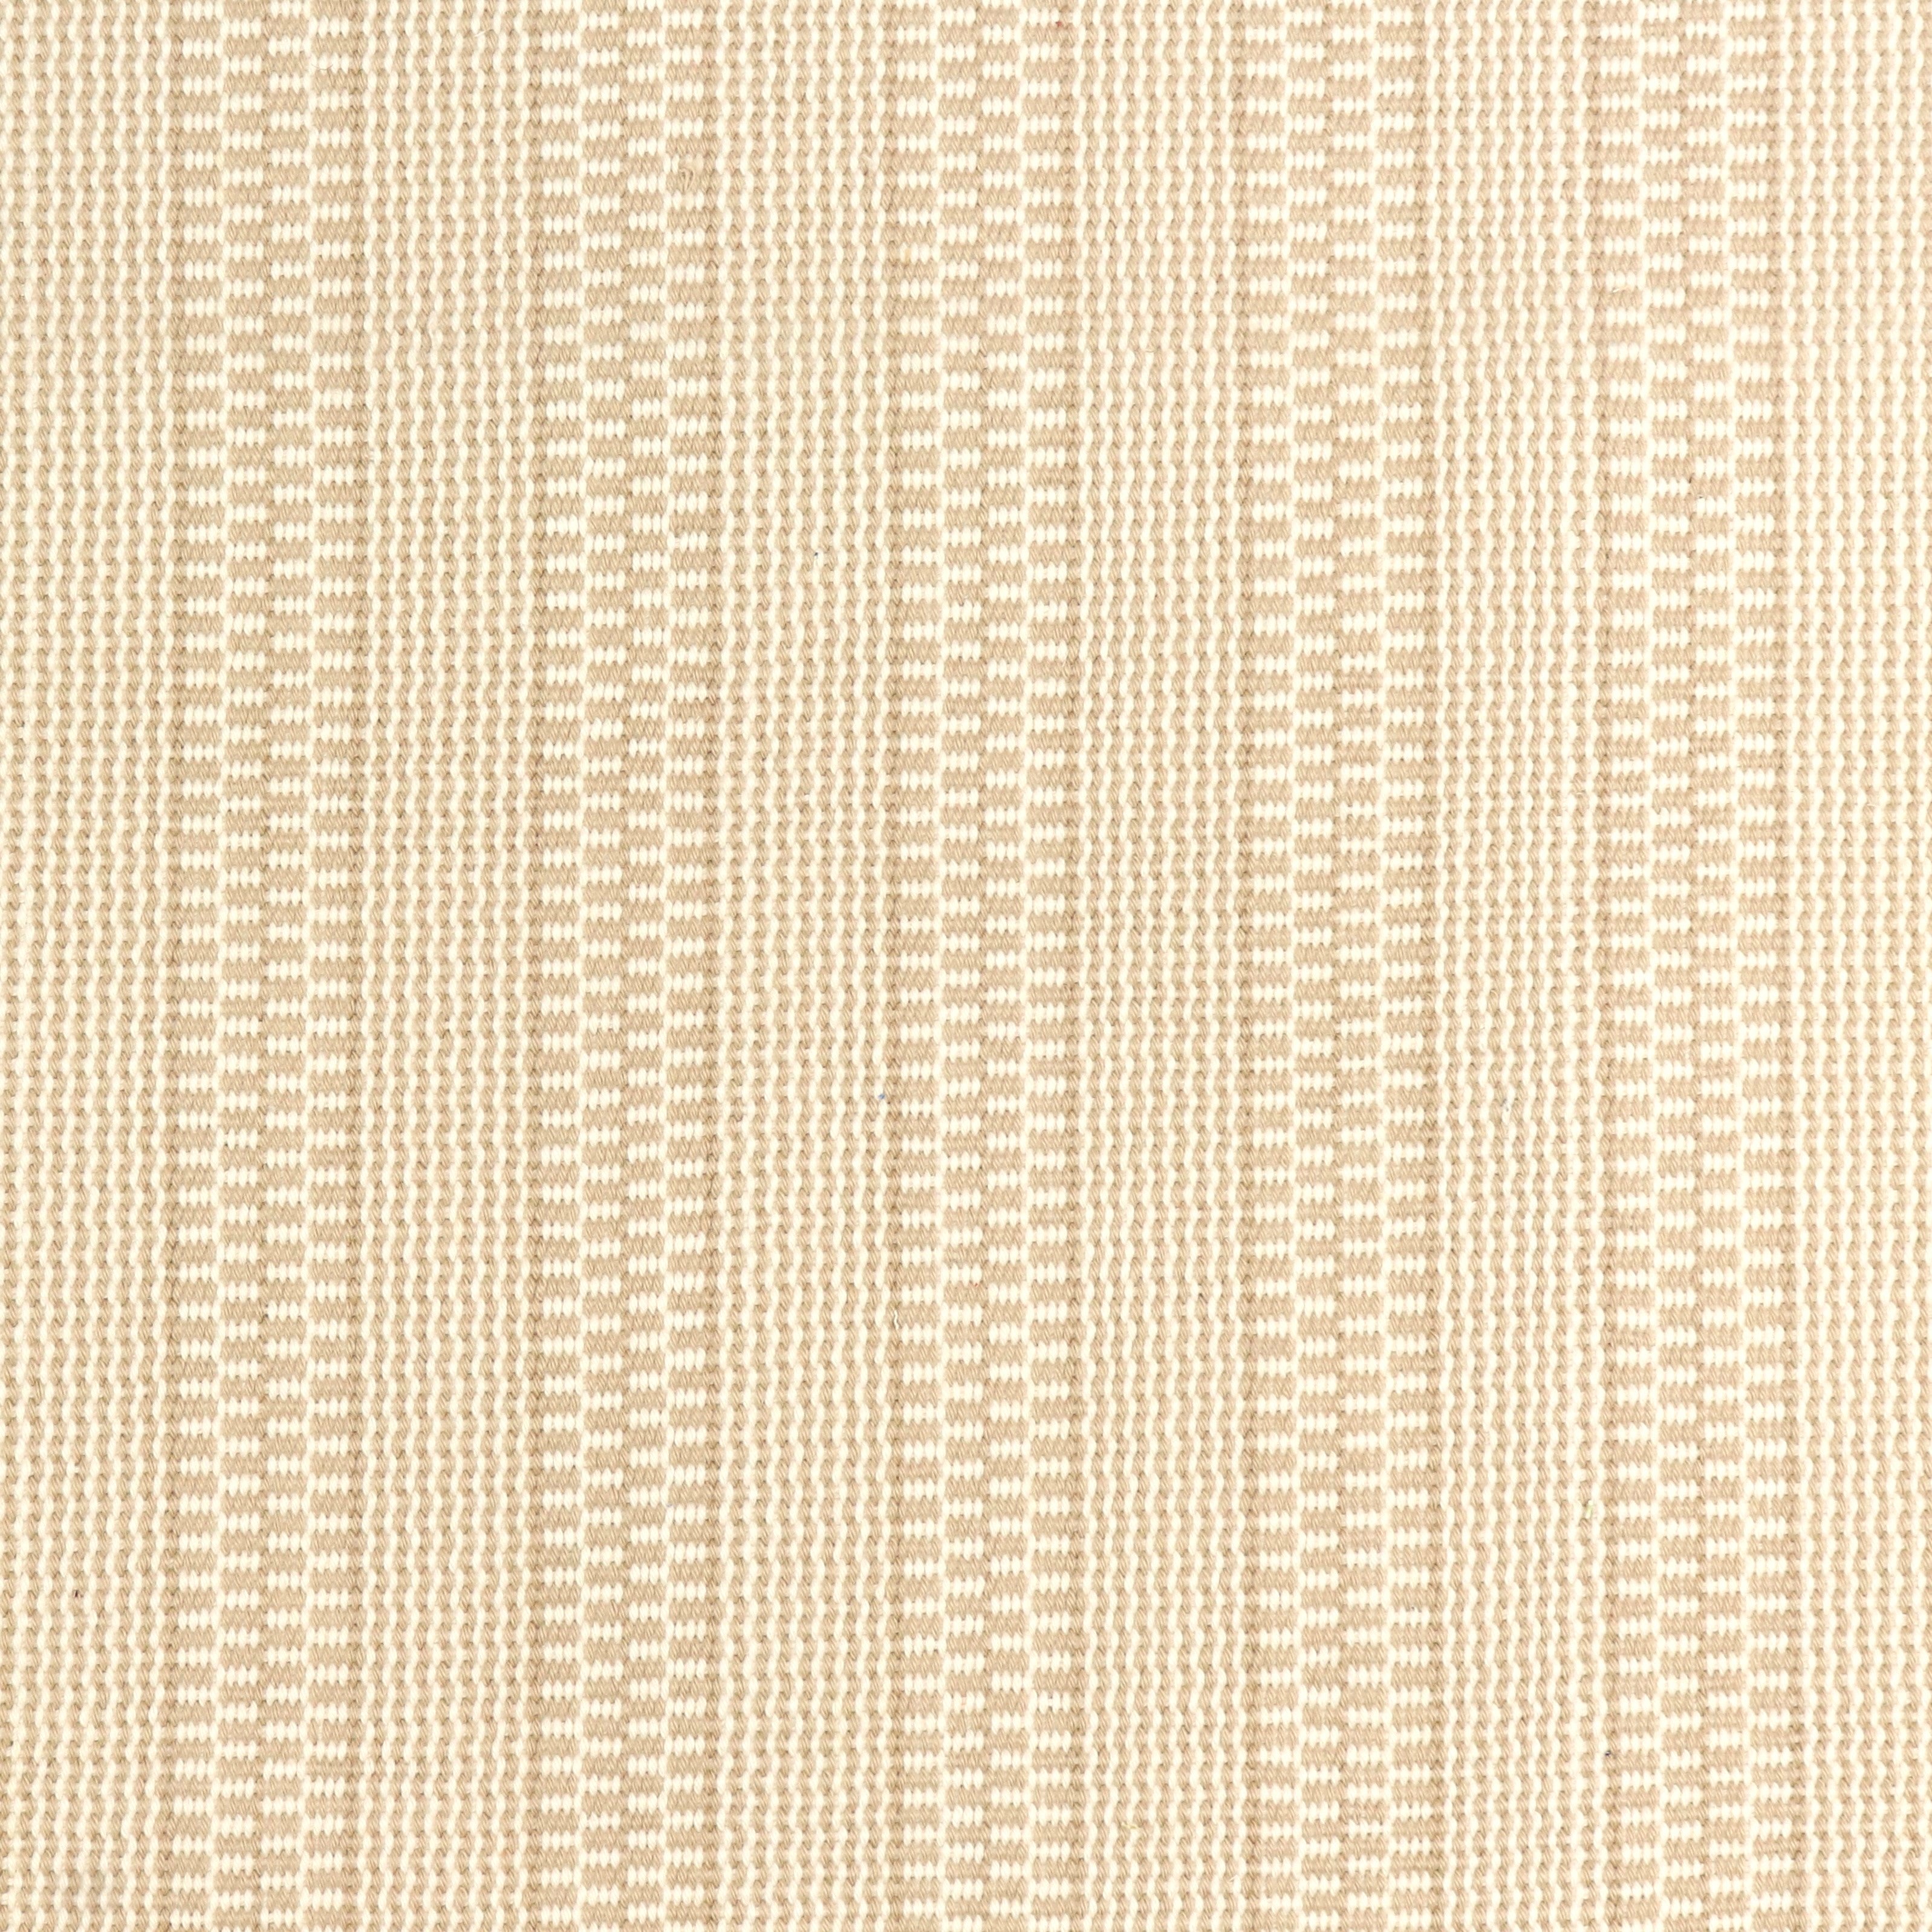 Detail of a hand-woven cotton fabric in a striped twill pattern in cream and white.